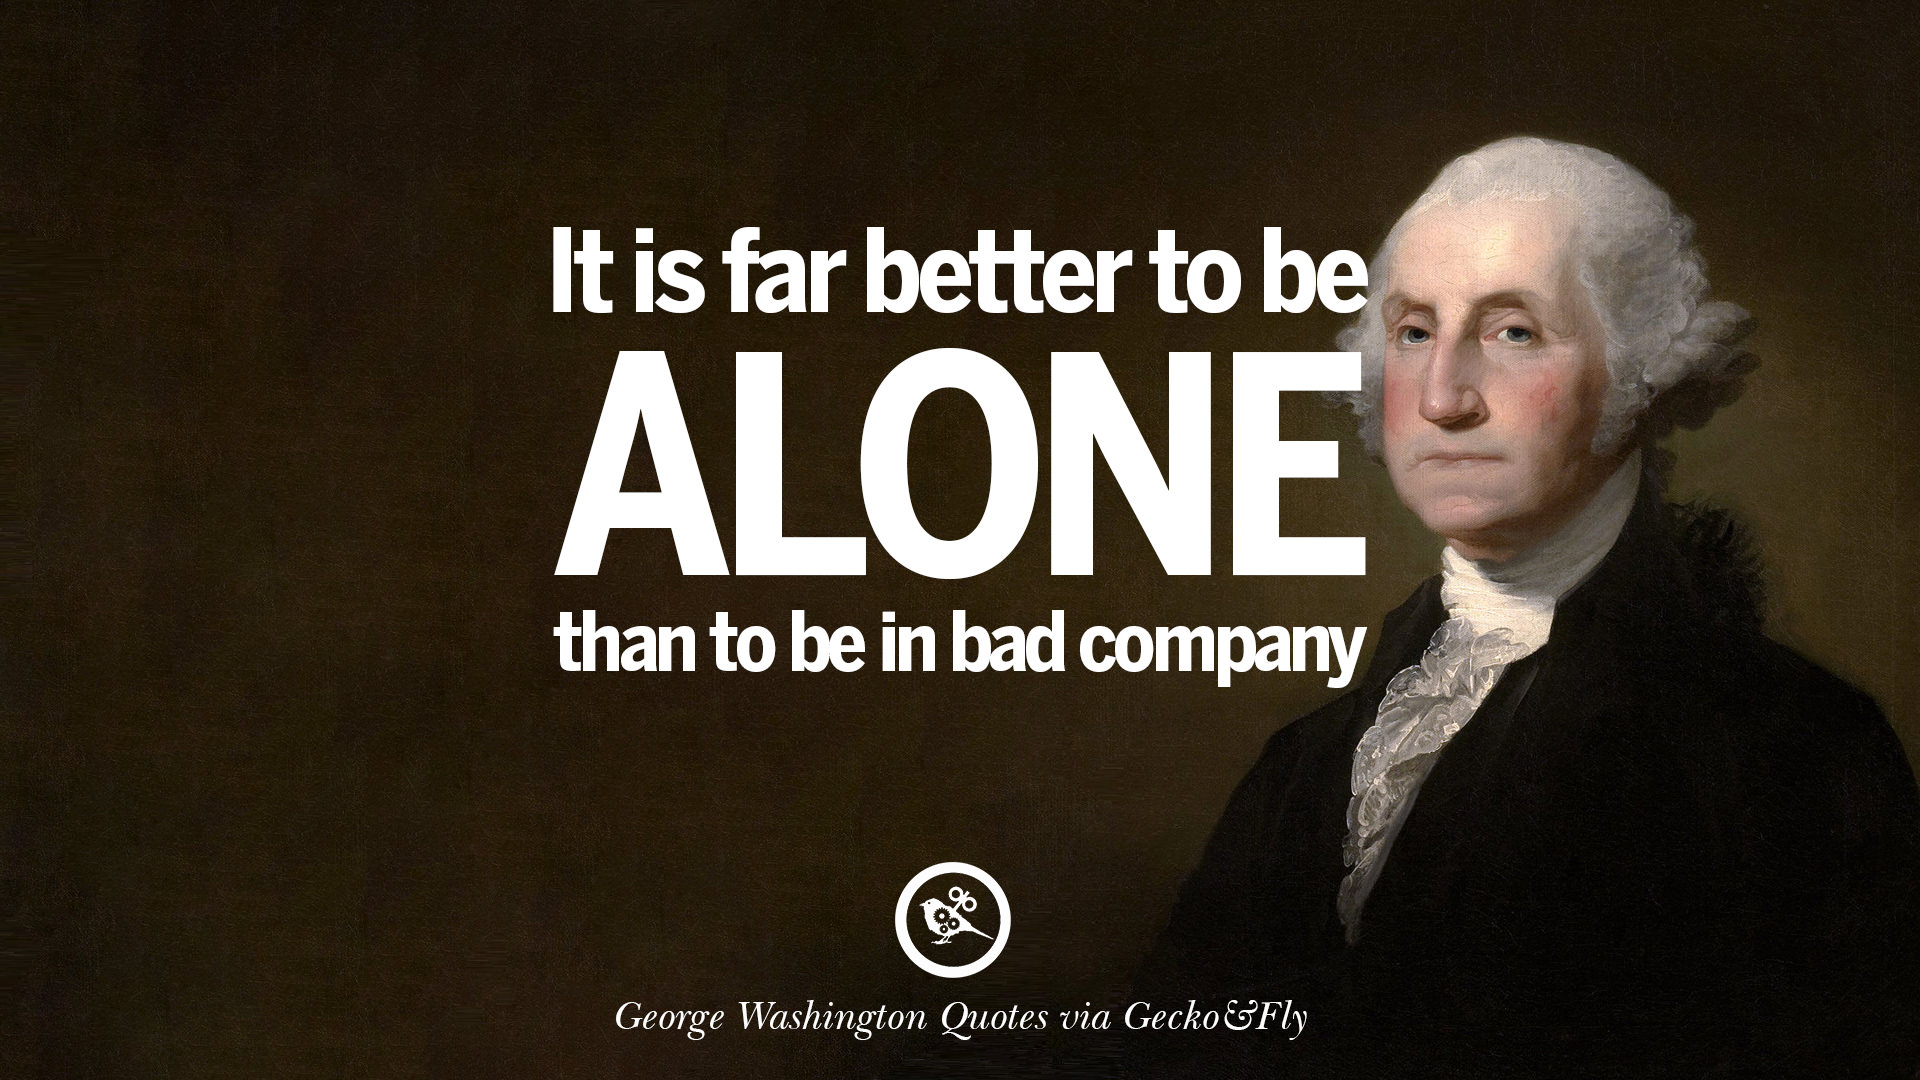 Best George Washington Quotes On Freedom  The ultimate guide 